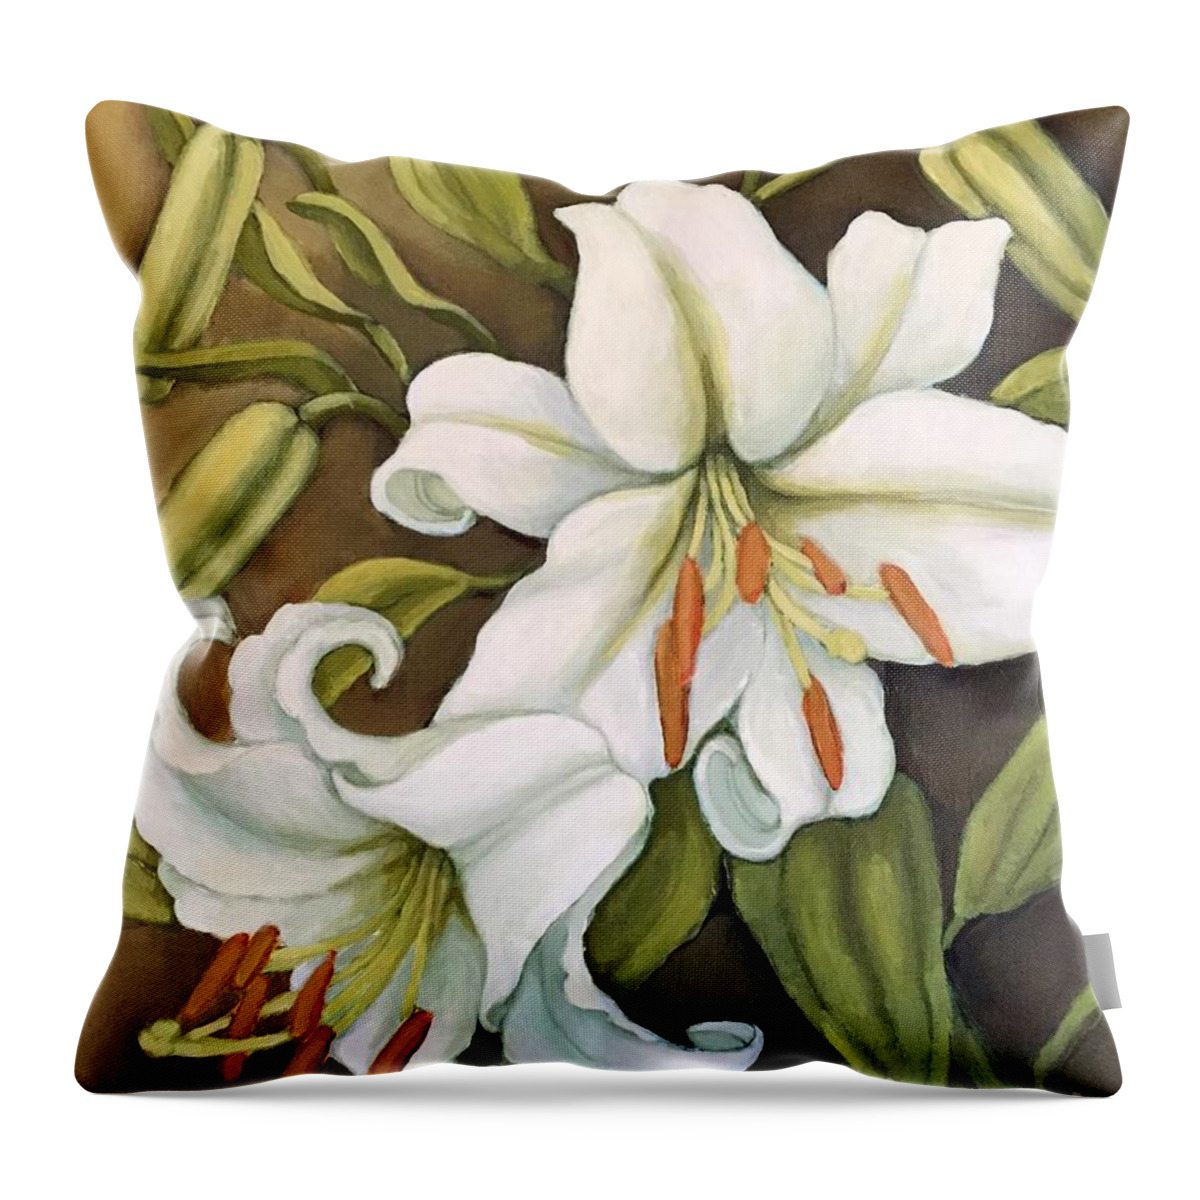 Floral Throw Pillow featuring the painting White Lilies by Inese Poga